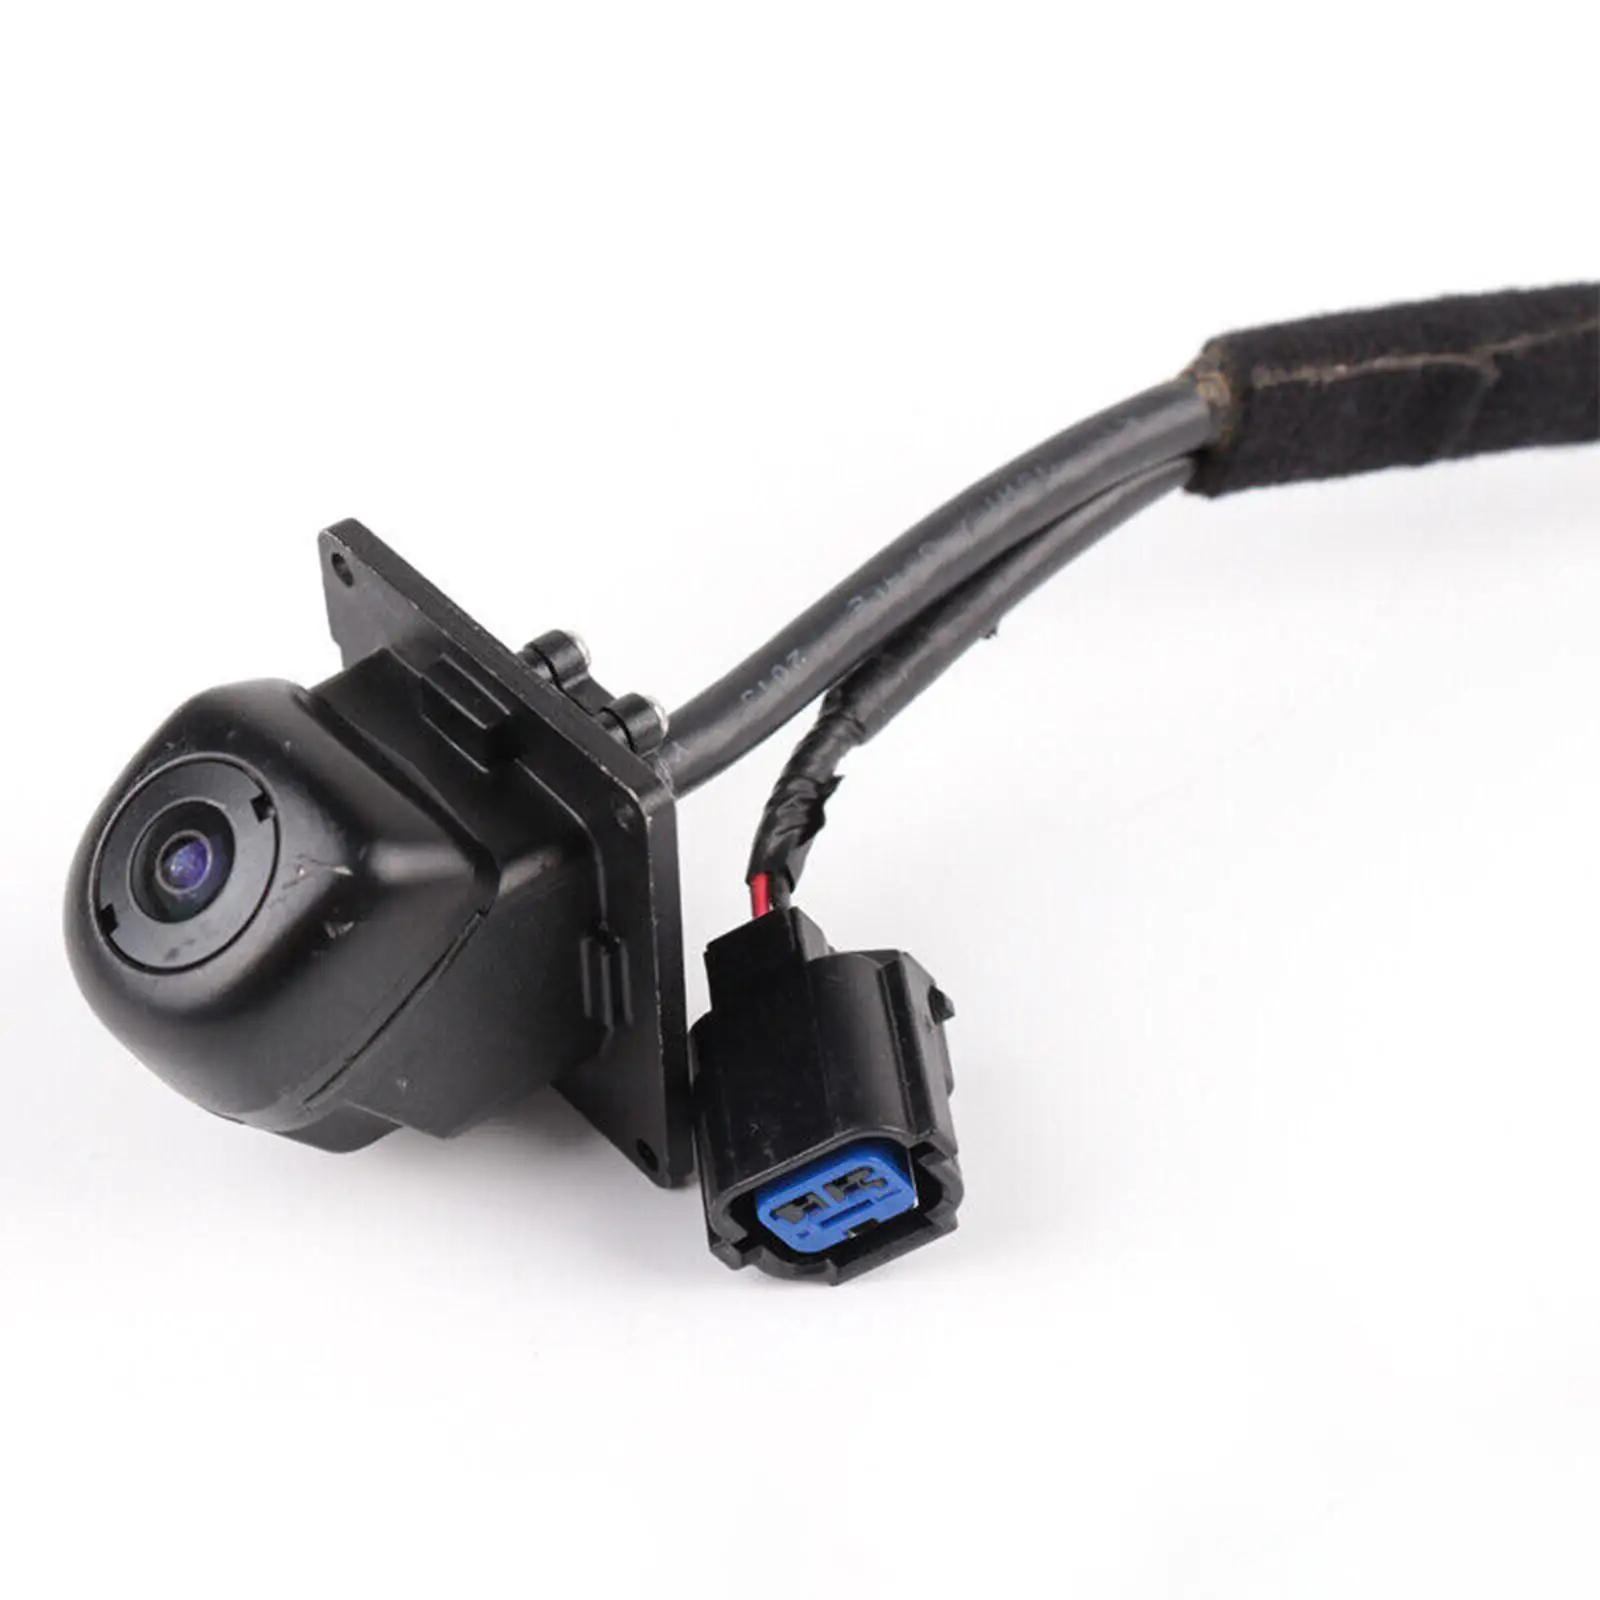 95766-D4500 Rear View Backup Parking Assist Camera for Kia Optima Accessories